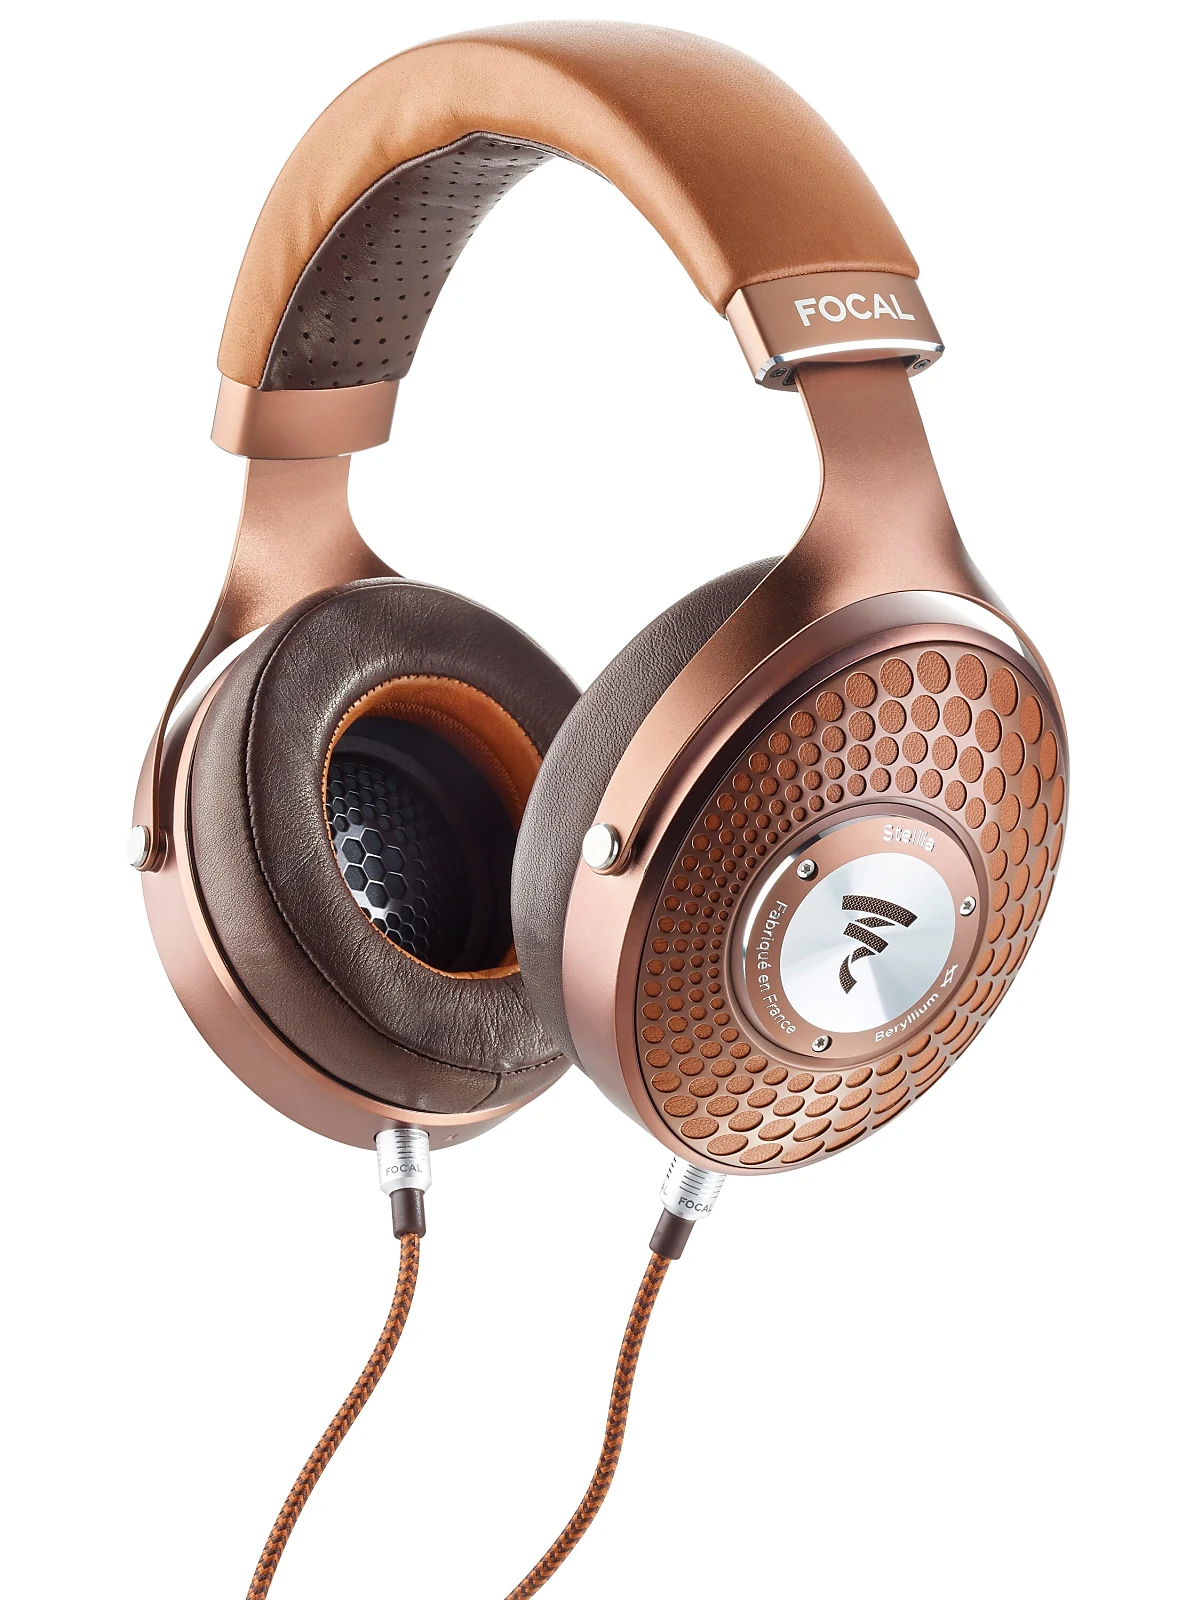 Focal Stellia Closed Back Reference Headphones